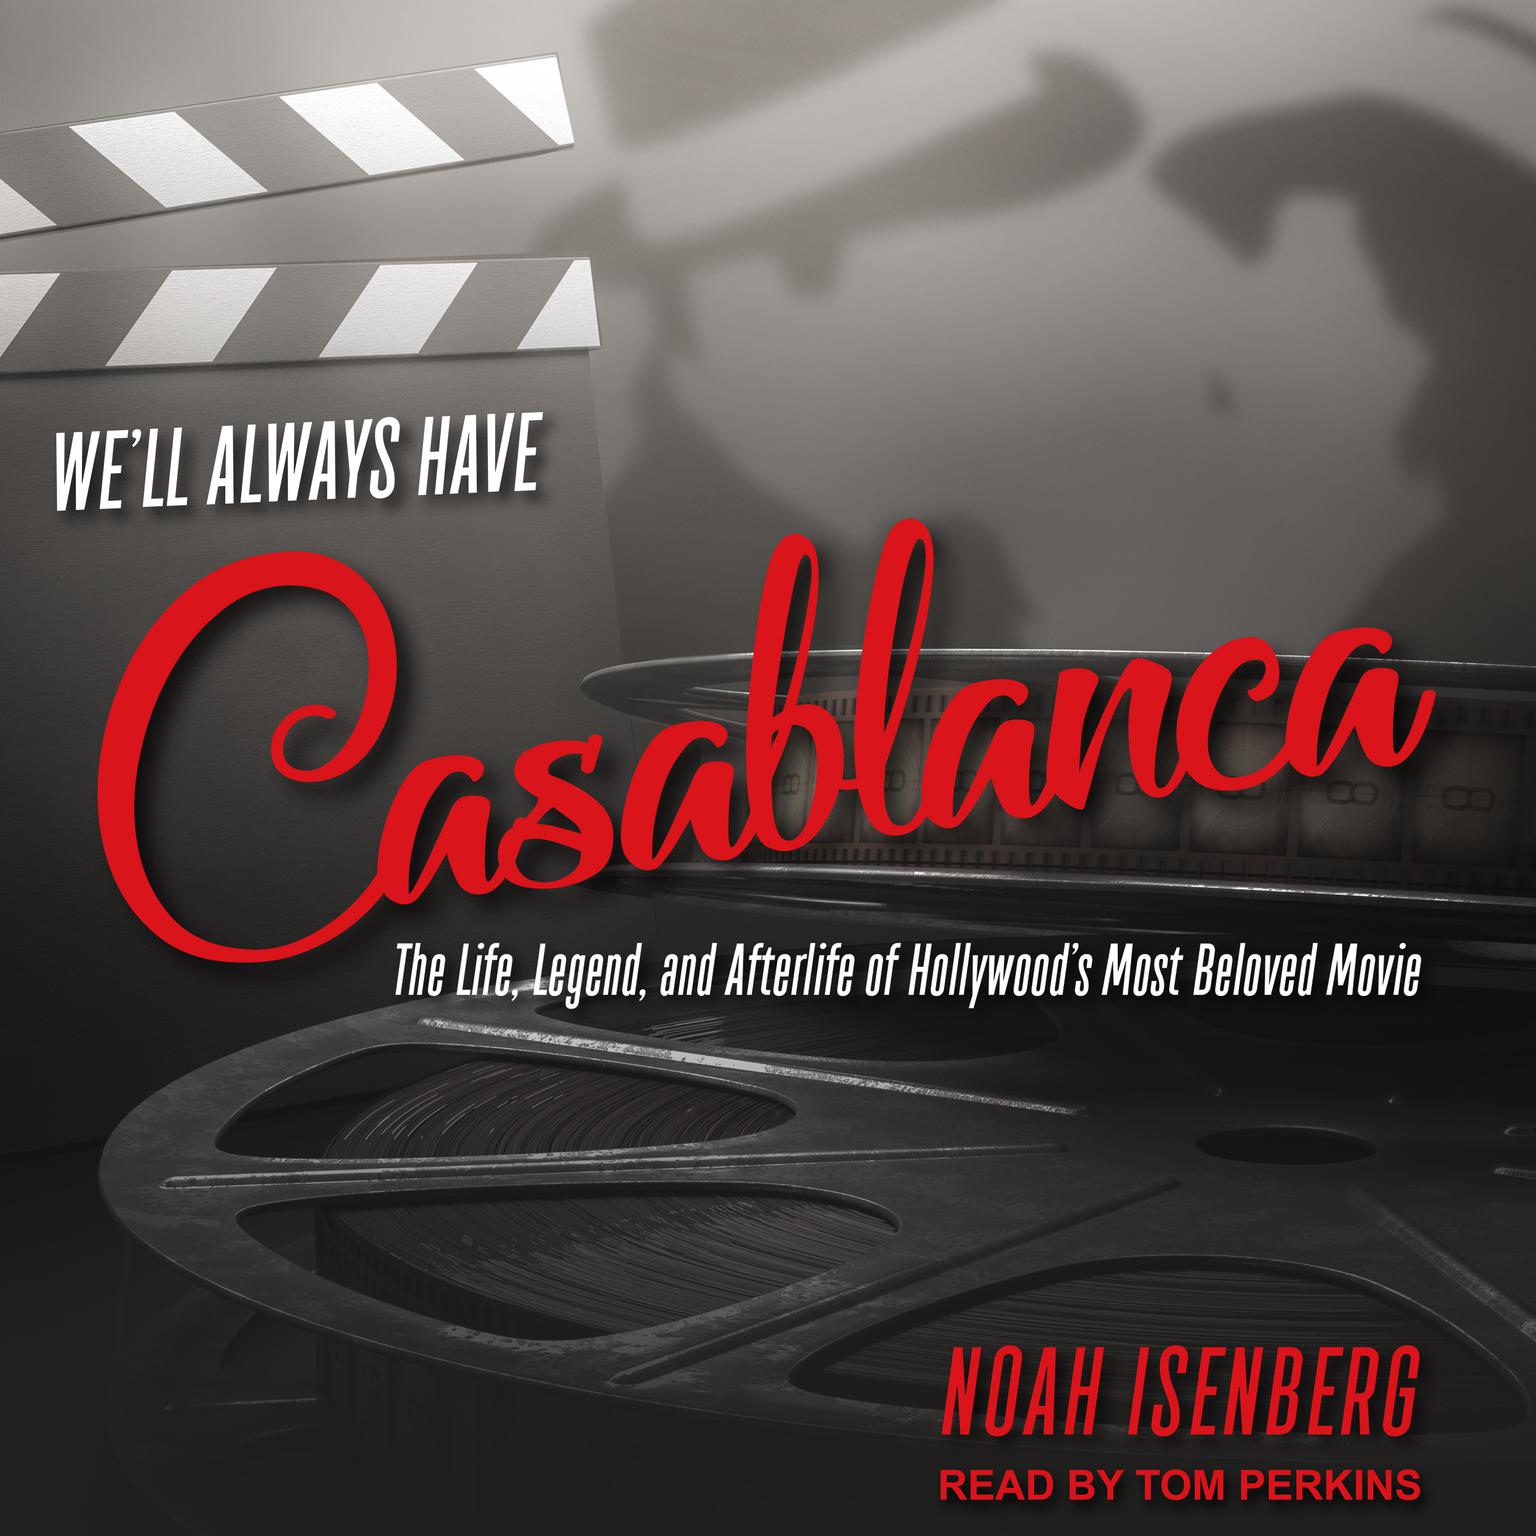 Well Always Have Casablanca: The Life, Legend, and Afterlife of Hollywoods Most Beloved Movie Audiobook, by Noah Isenberg